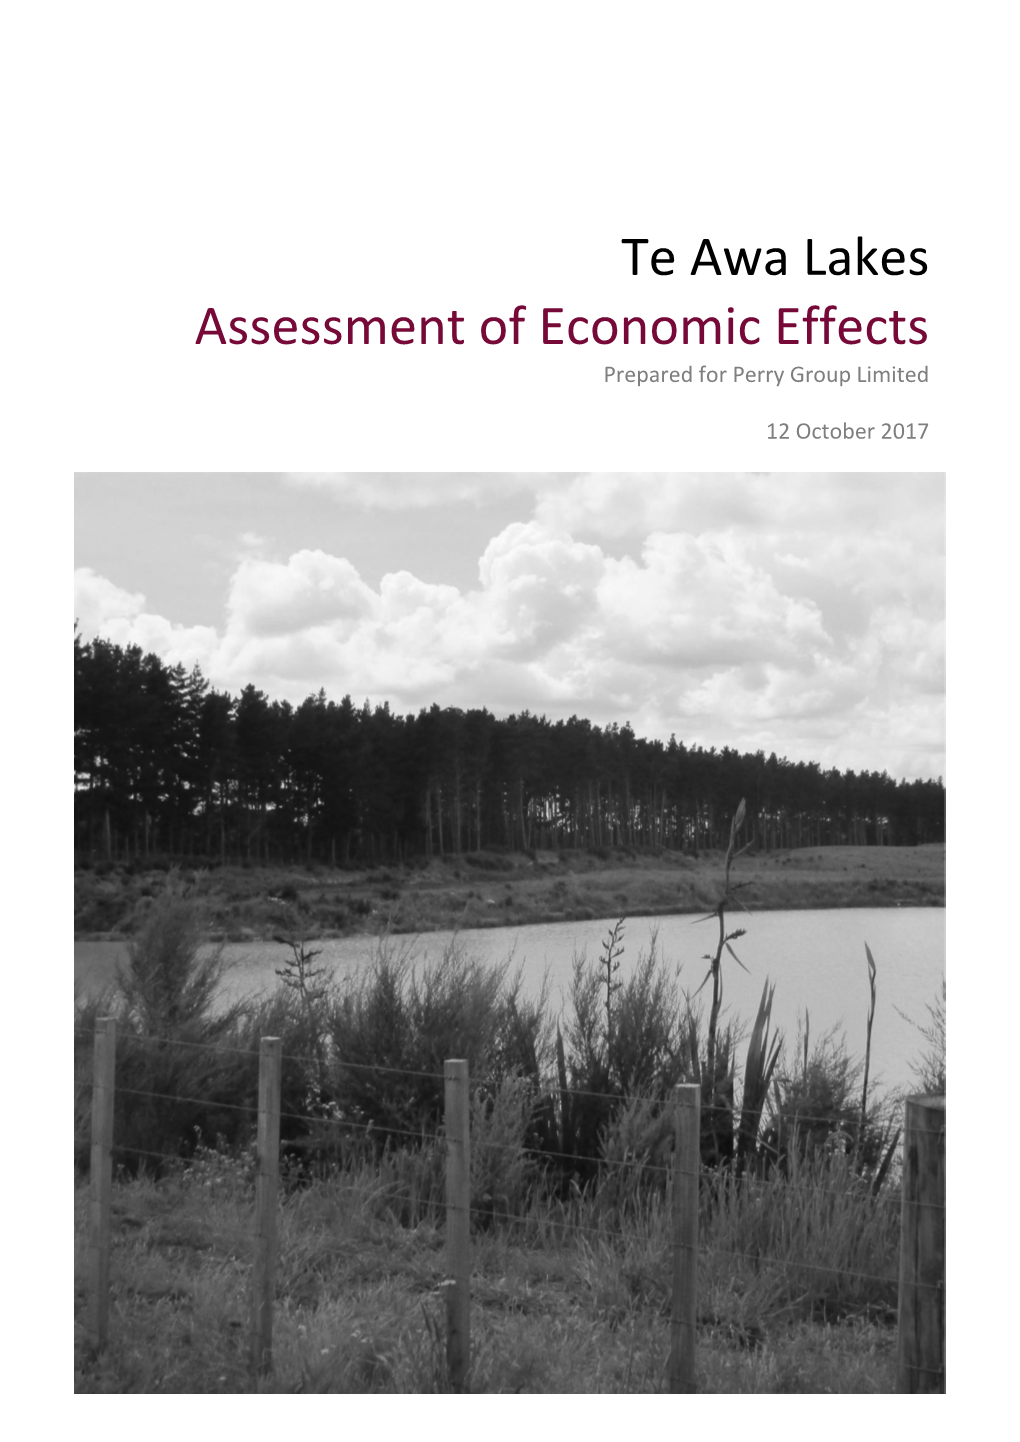 Te Awa Lakes Assessment of Economic Effects Prepared for Perry Group Limited